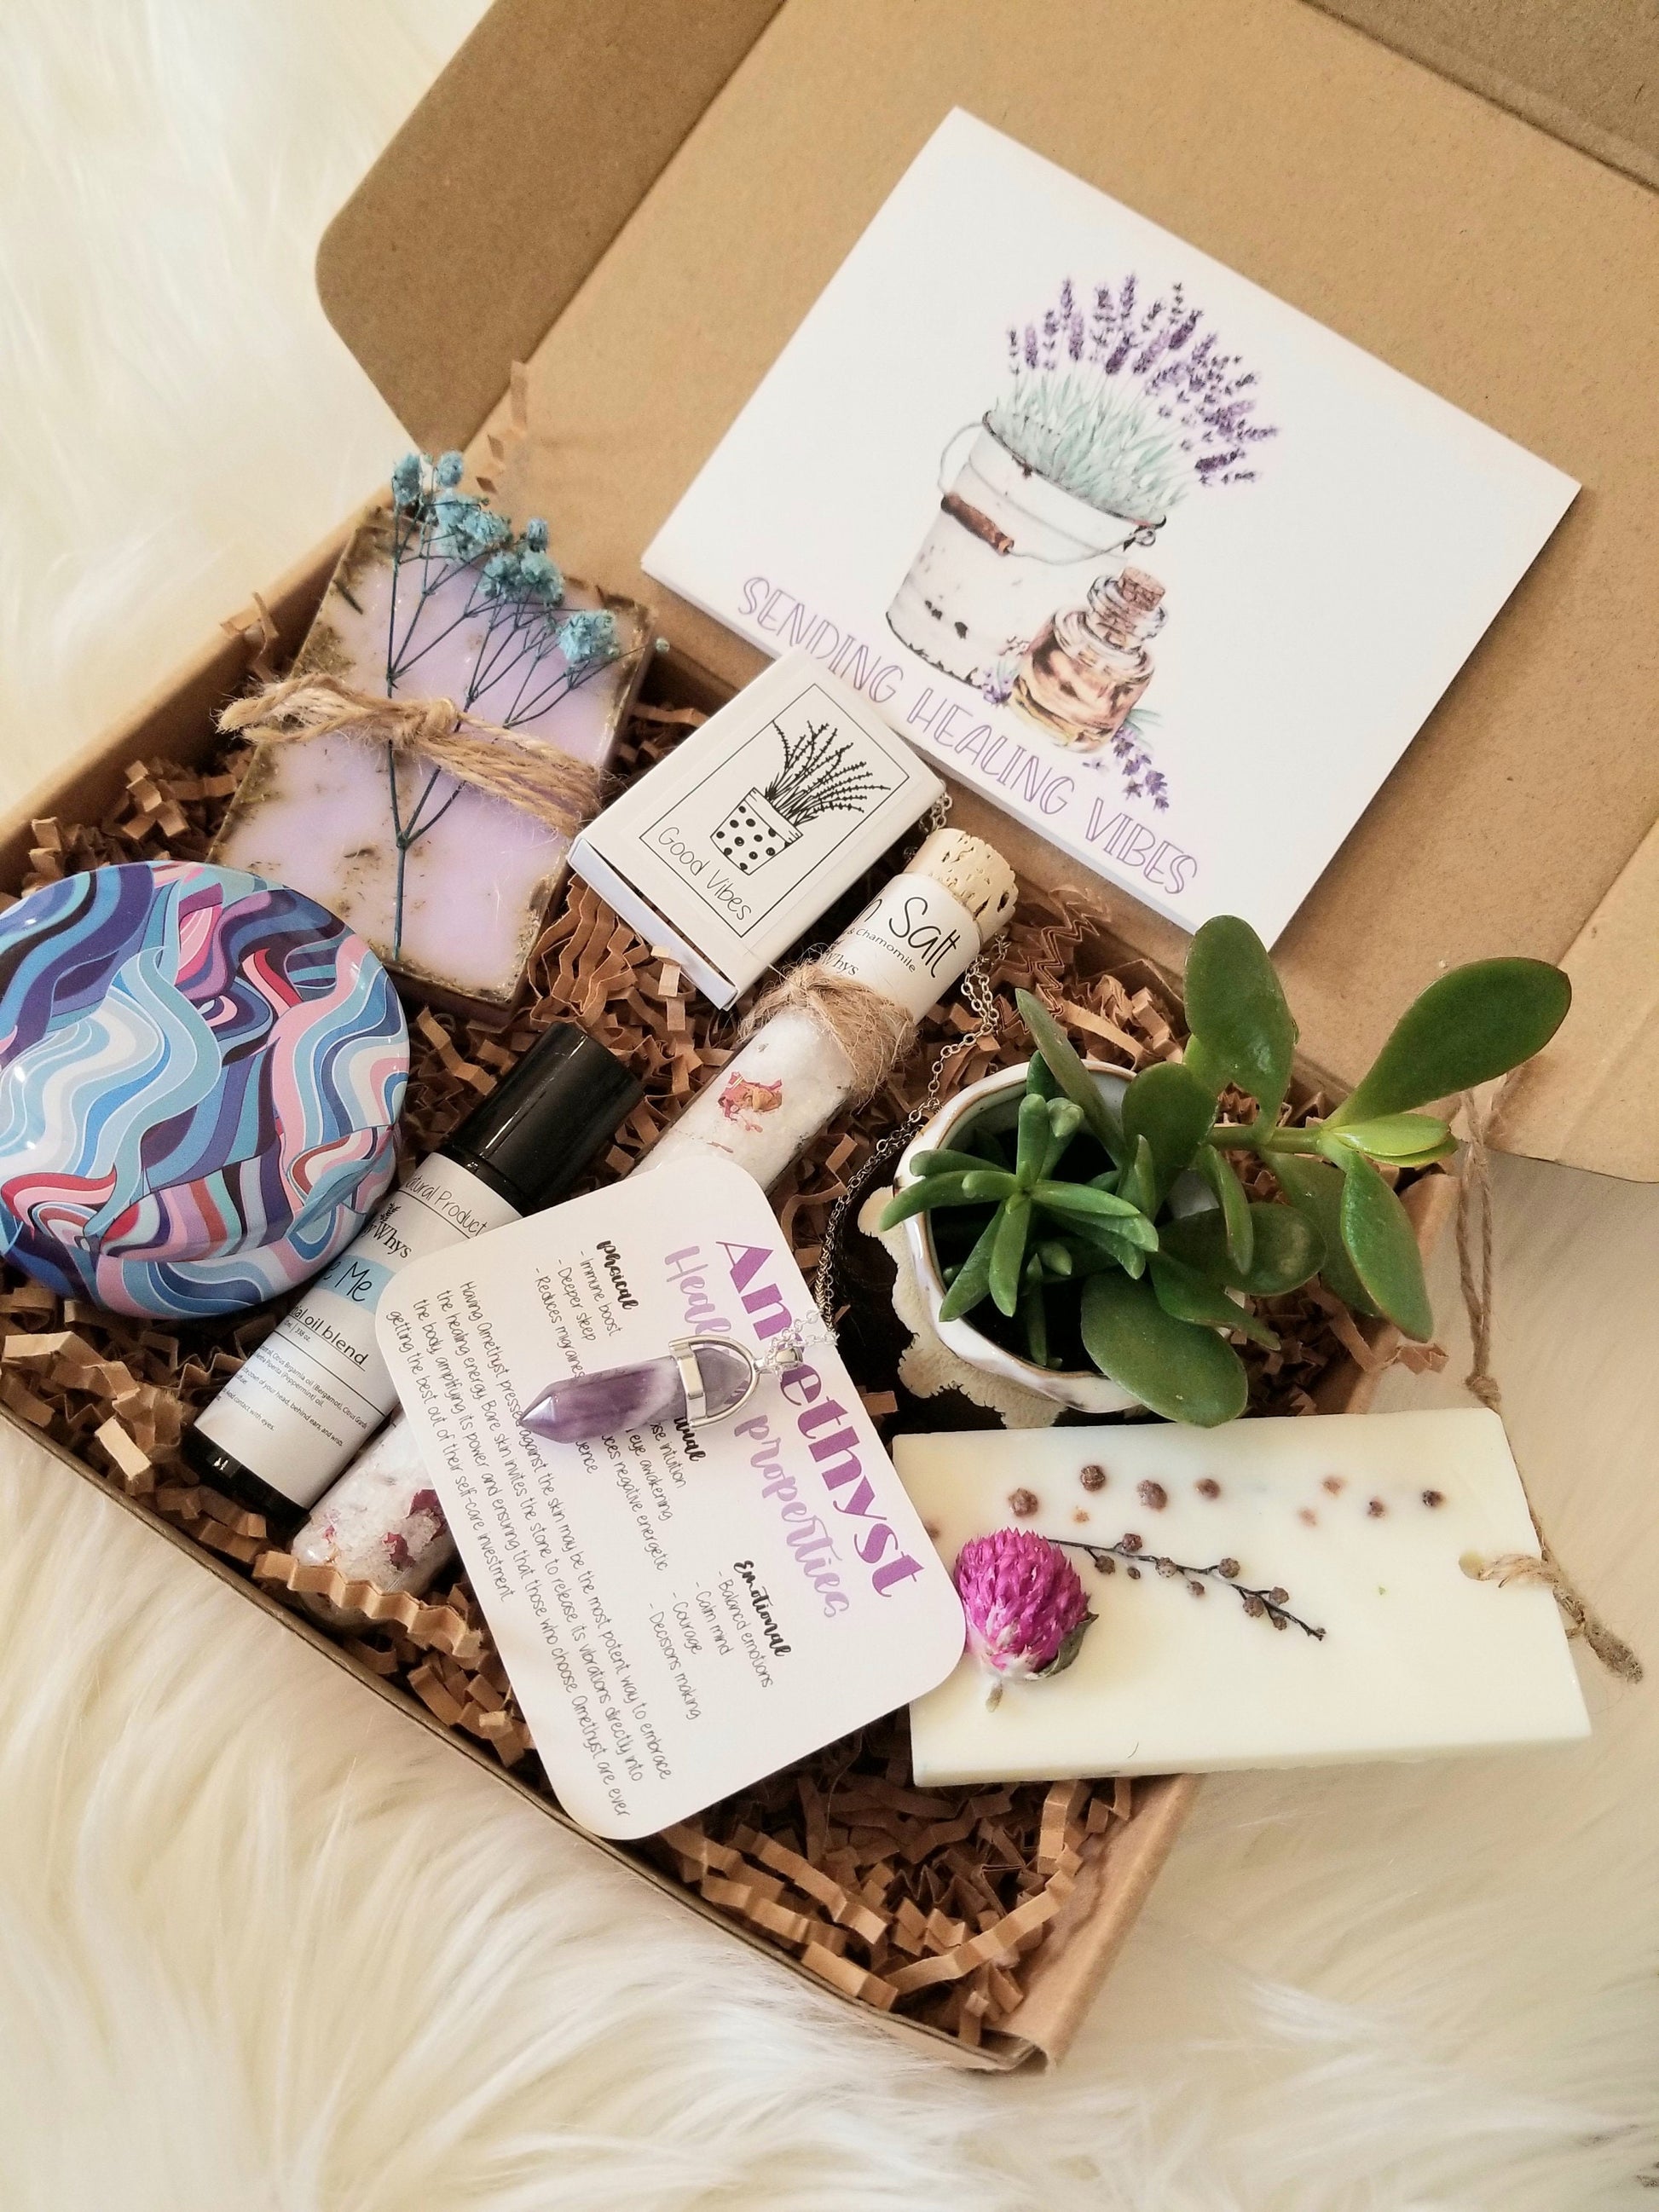 Healing vibes gift box, Thinking of you care package, spa gift basket, send healing vibes in a box, bath and beauty box, pamper yourself box